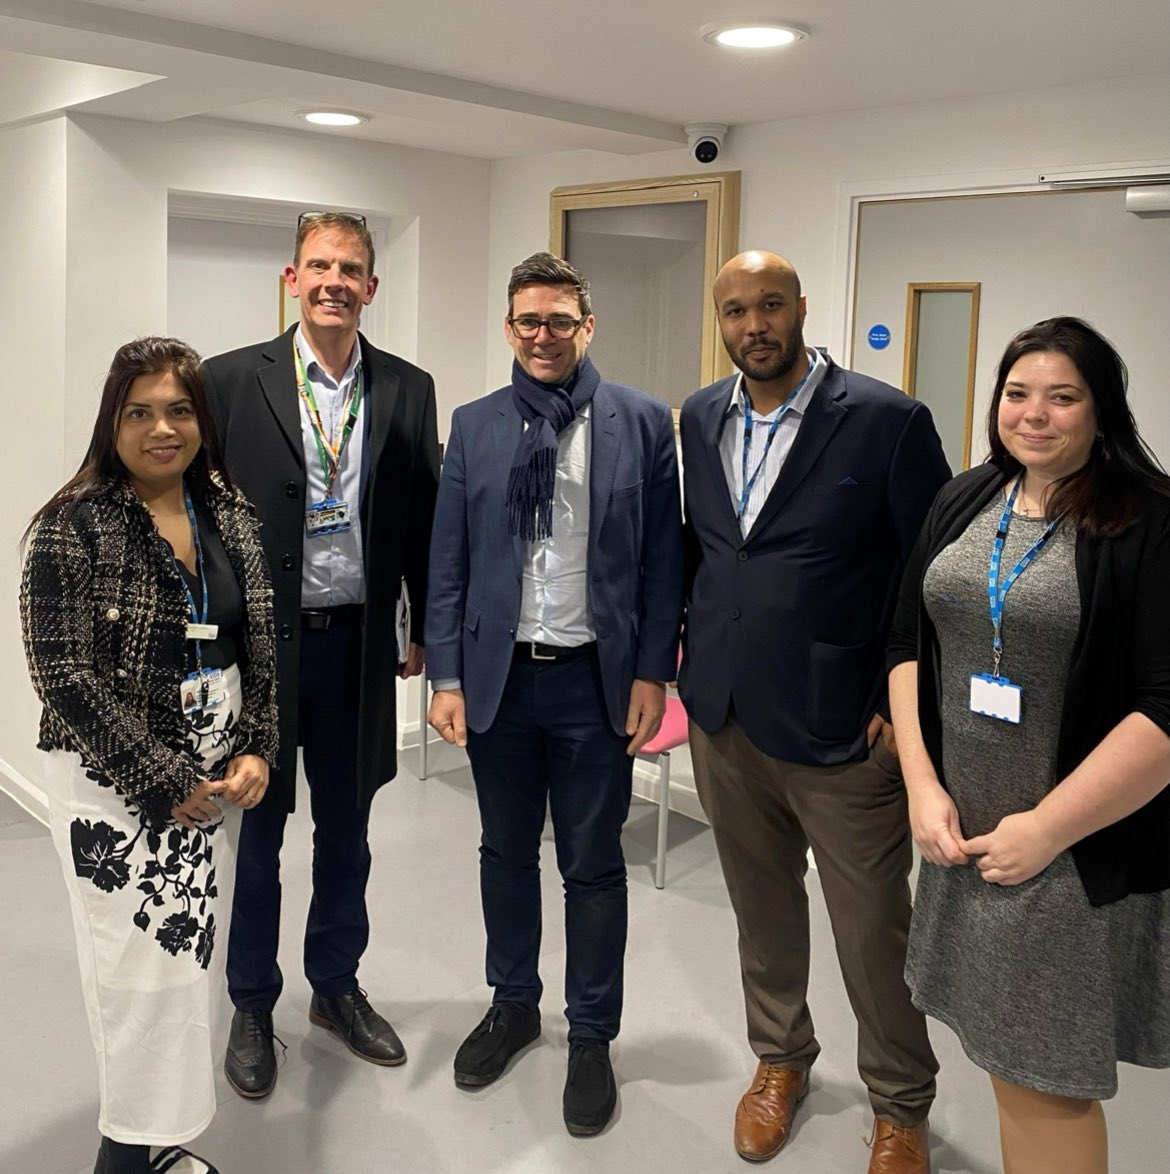 Great to welcome @MayorofGM to our wonderful #RadcliffePlace unit for young people living with #LD. Unique in the #NHS Radcliffe helps young people in crisis regain independence without a hospital admission. #PennineCarePeople @PennineCareNHS @DiptiPa65572757